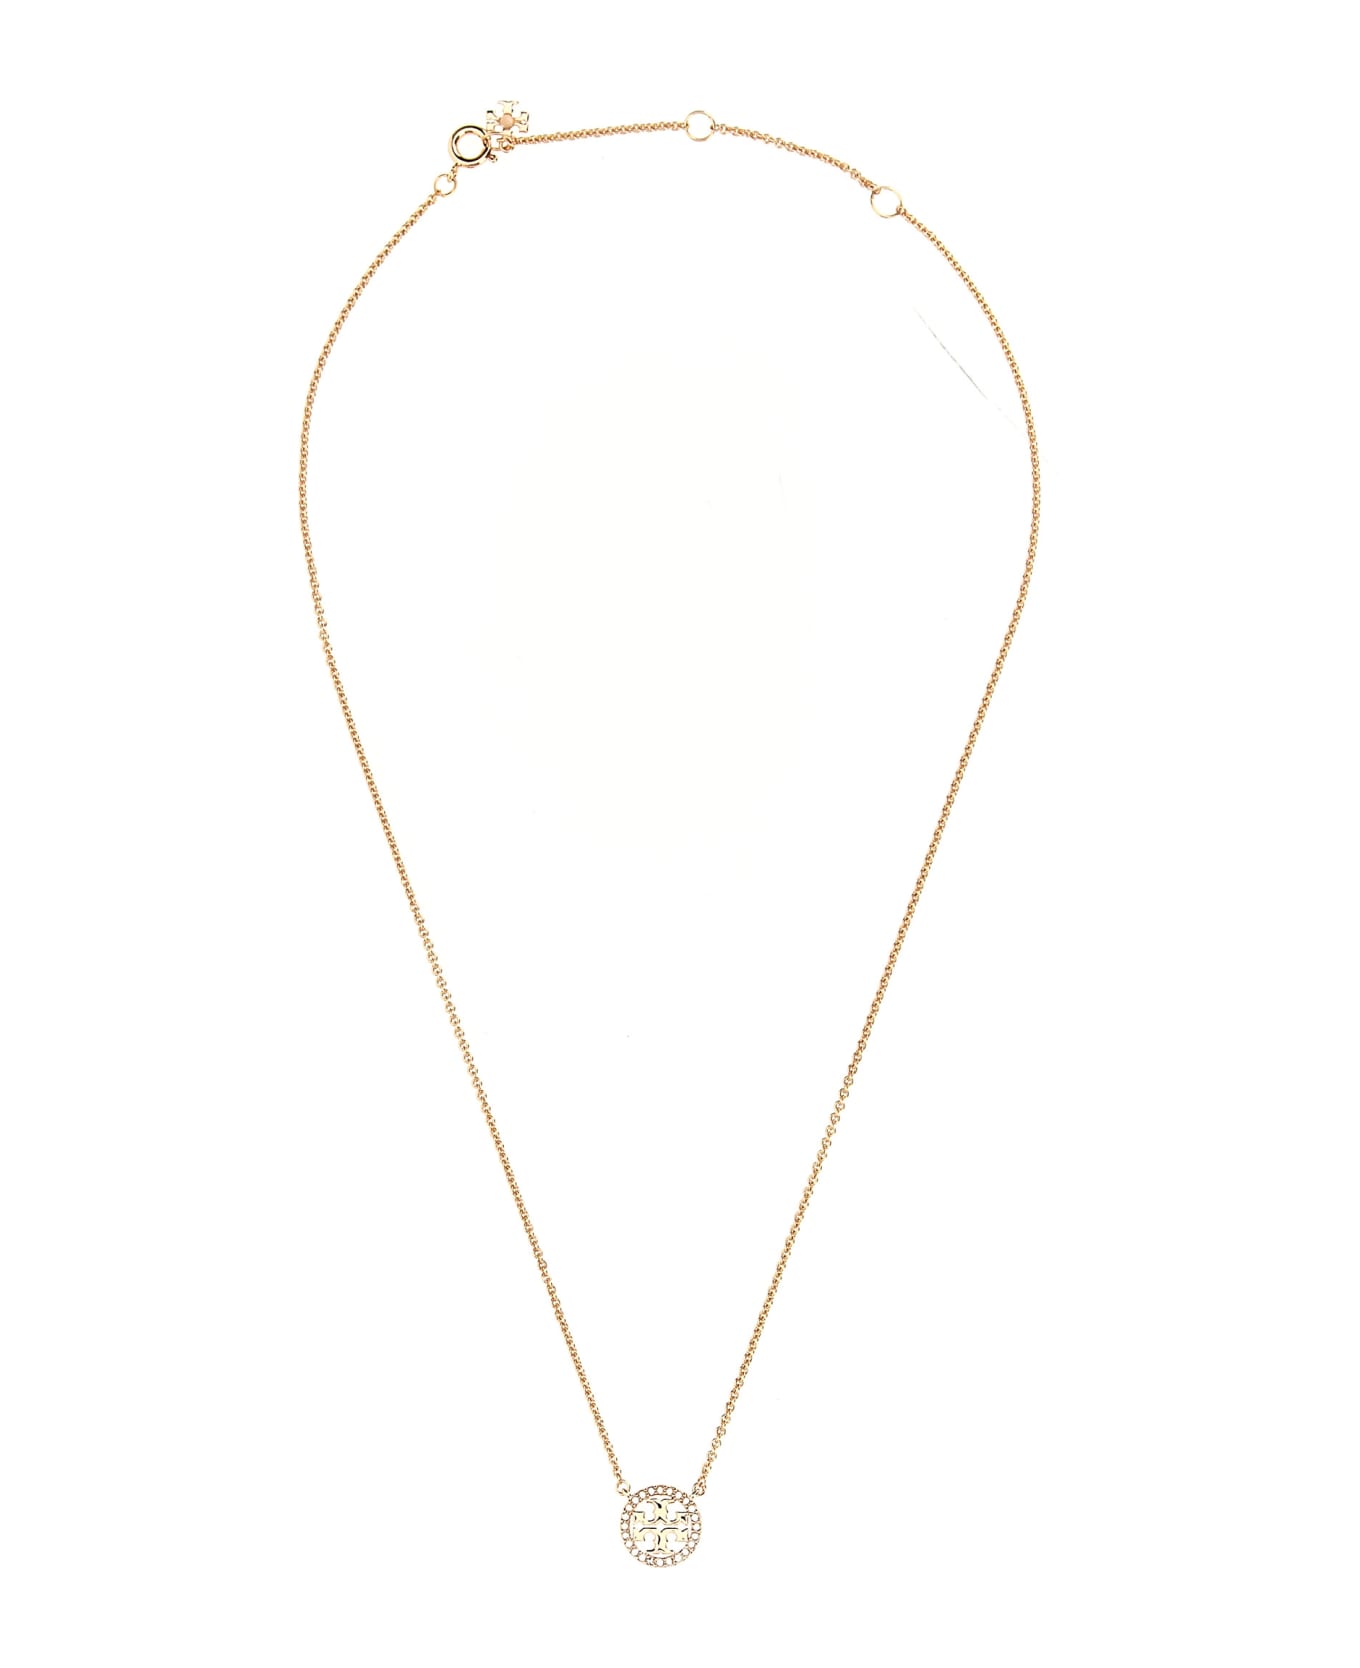 Tory Burch Miller Necklace - ROSA